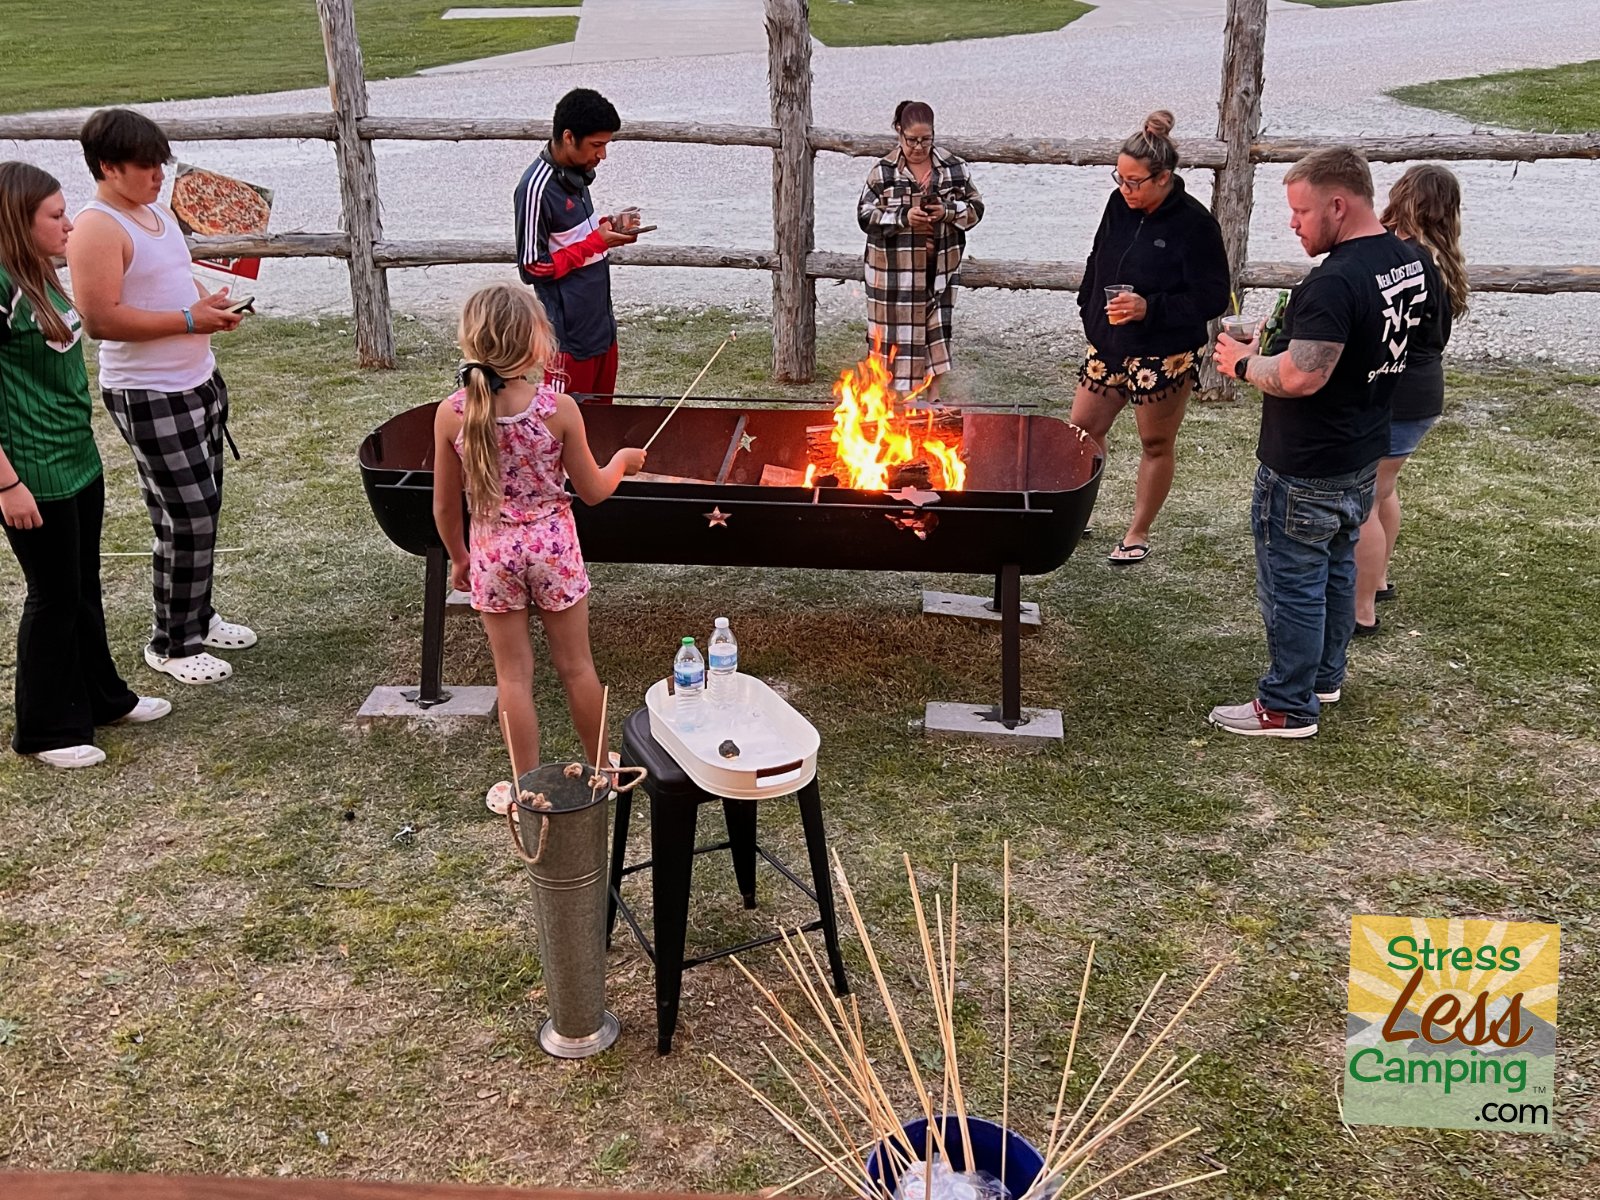 Some of the younger guests making s'mores at Two Creeks Crossing